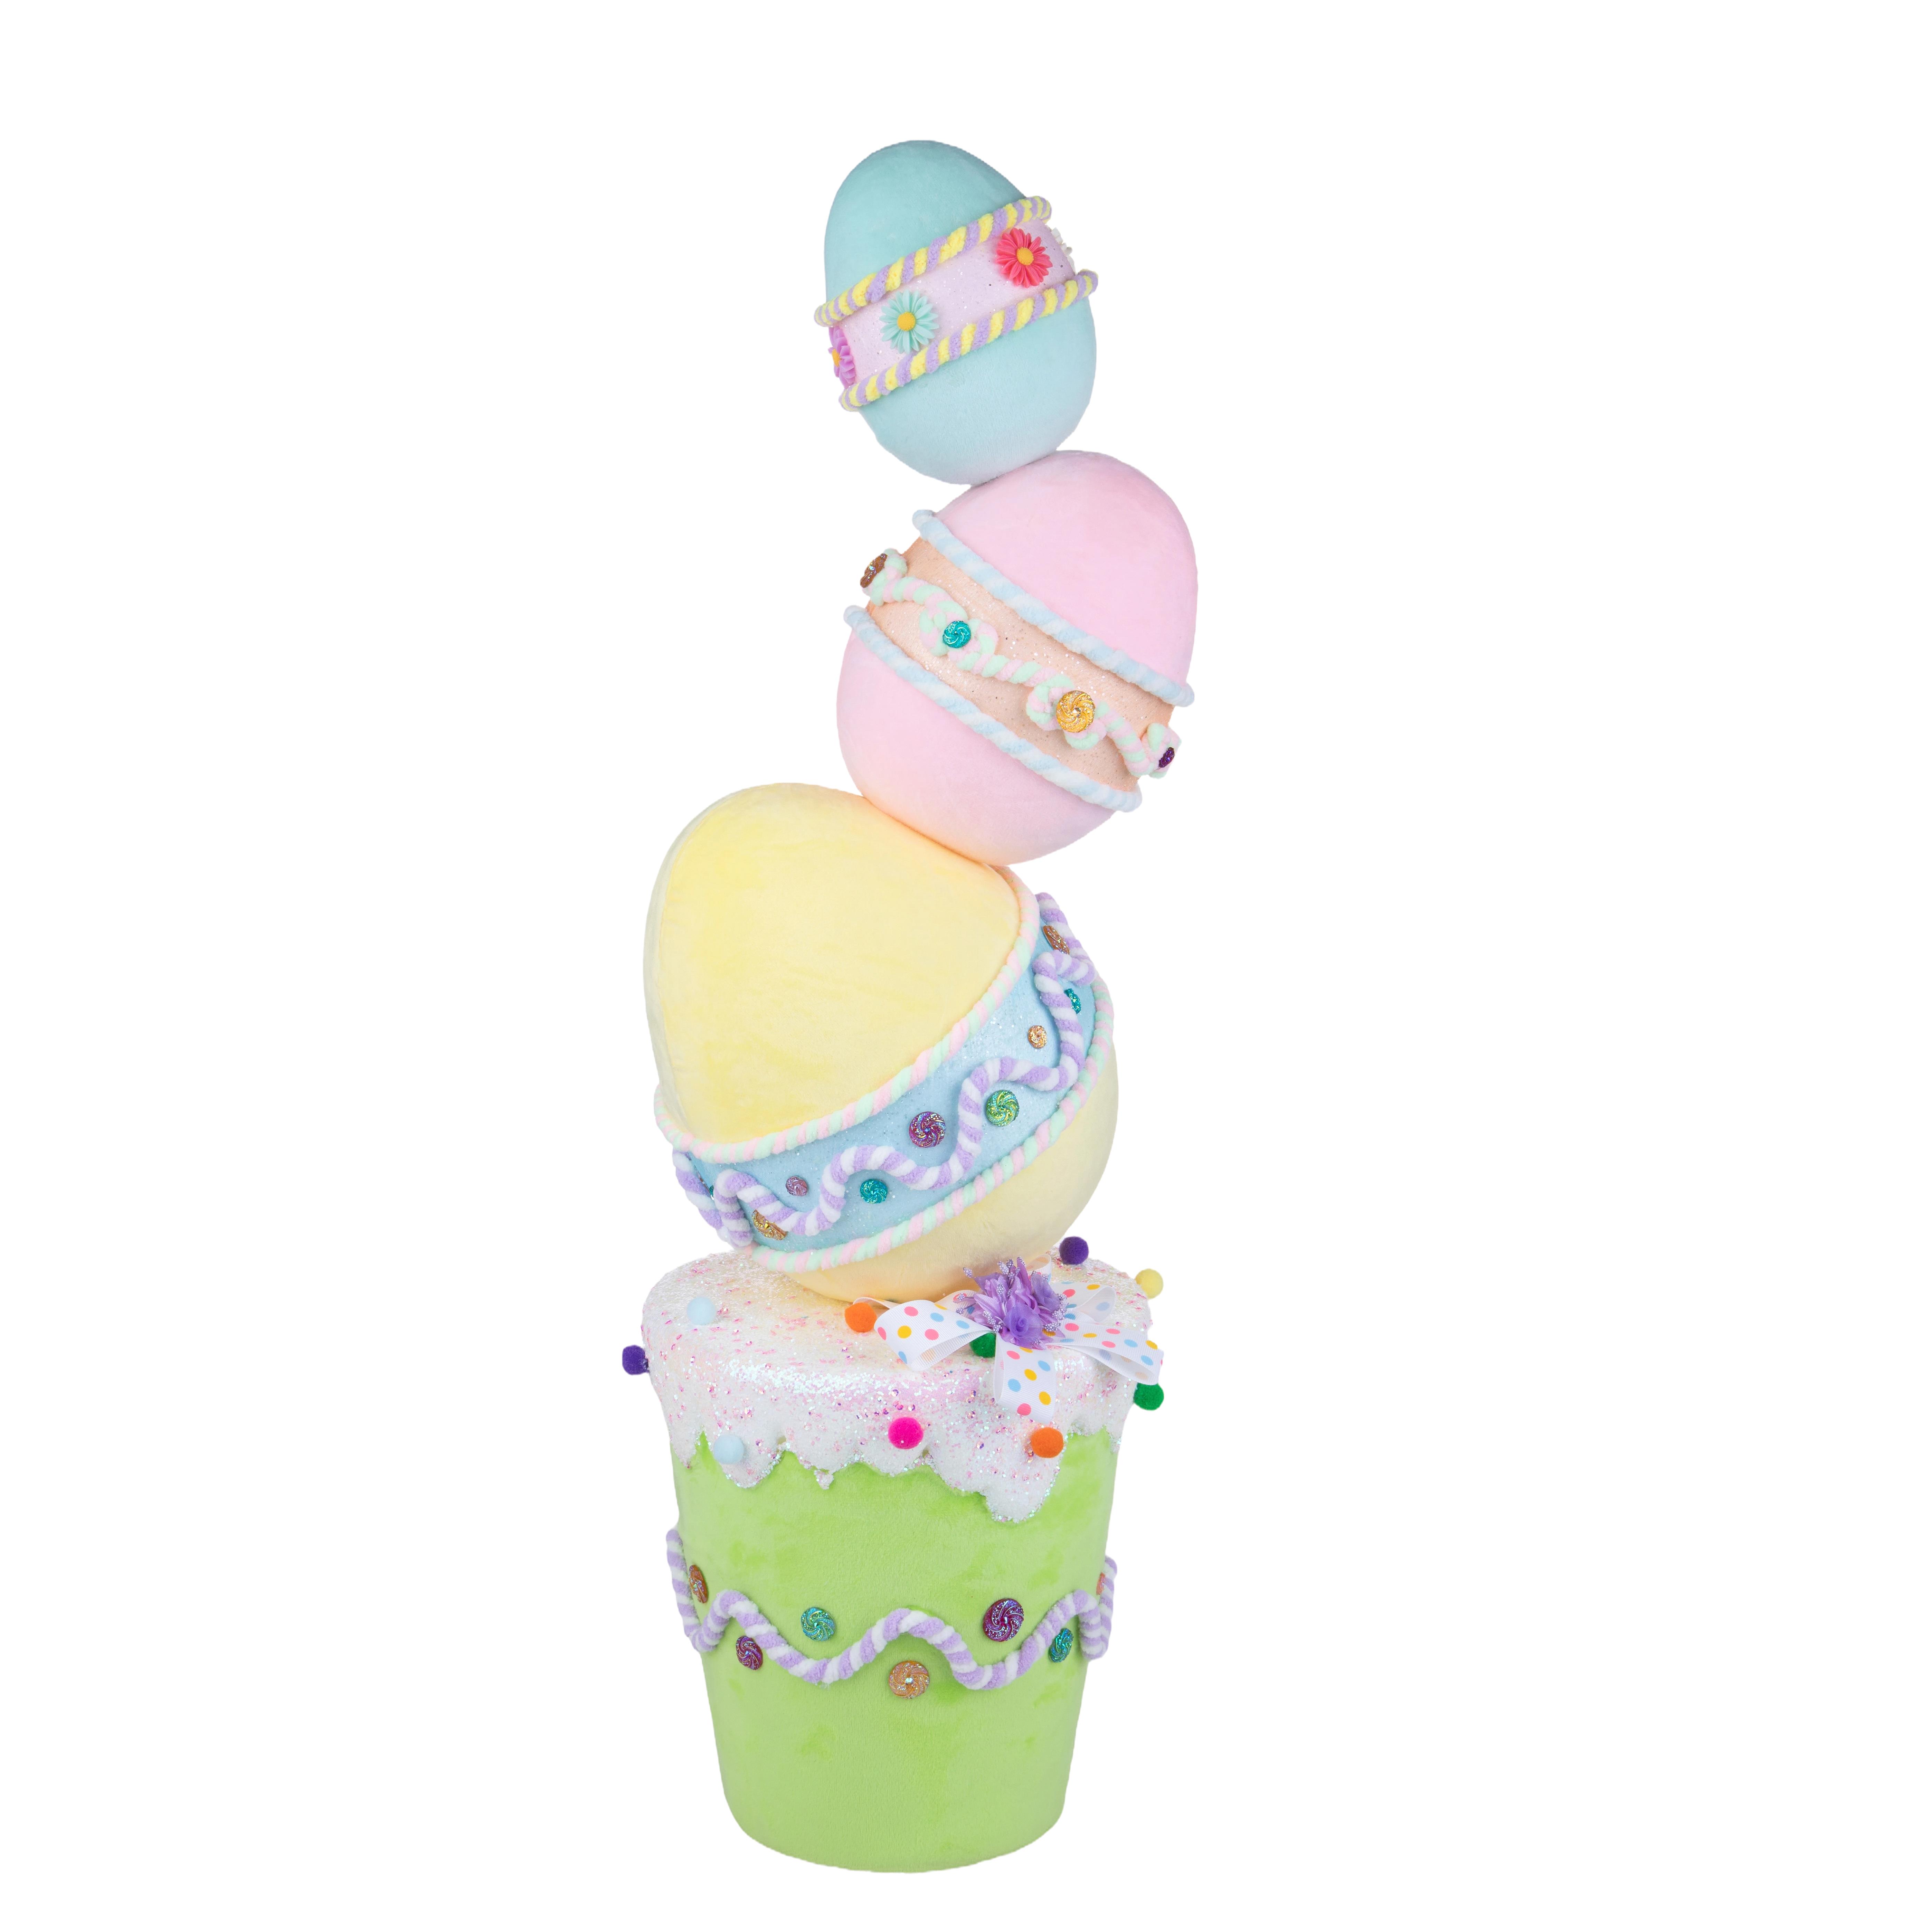 SPRING AND EASTER DECORATIONS, Easter subjects, rabbits, hens, sheep ect., UOVA 21XH.74 CM IN VASO